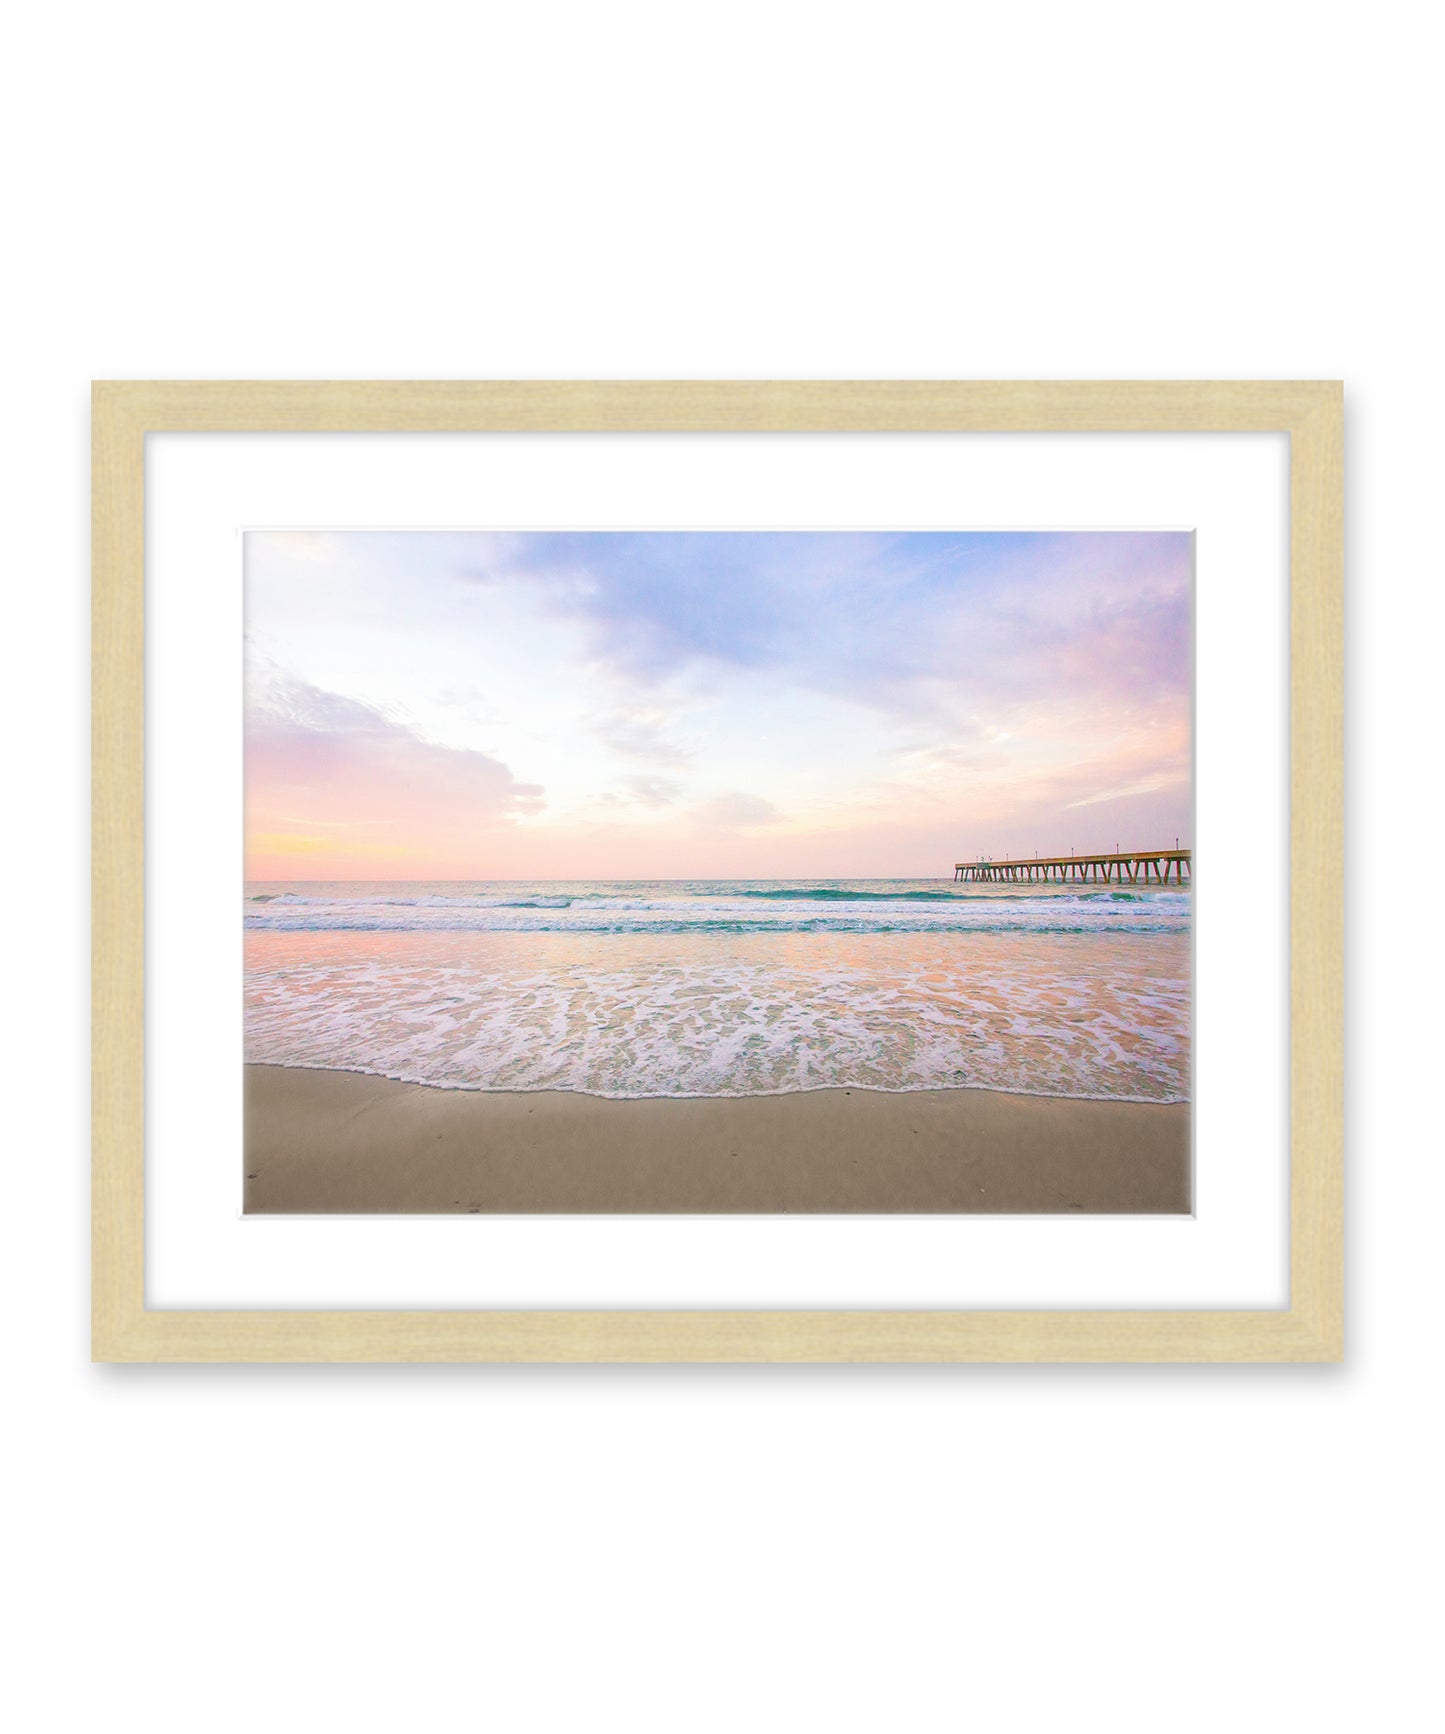 pastel pink and purple sunrise Wrightsville beach photograph, natural wood frame by Wright and Roam